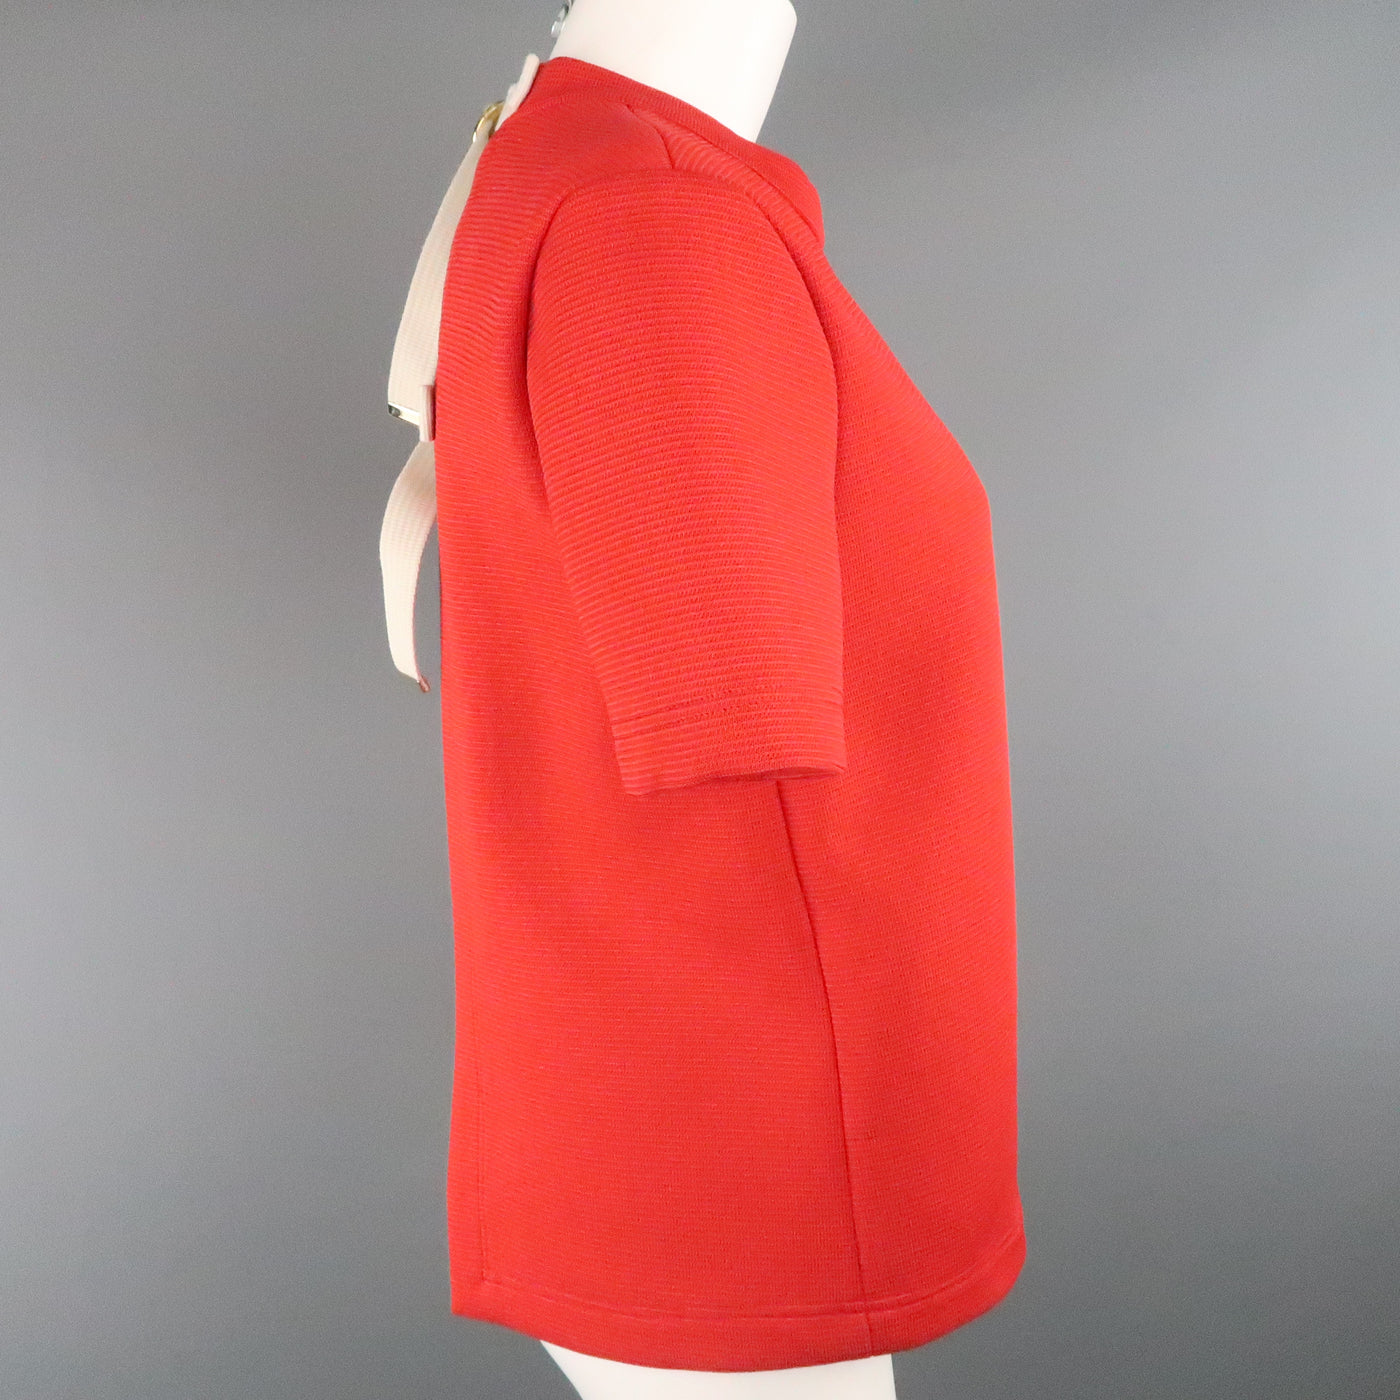 MARNI Size 6 Red Structured Cotton Open Back Belt Closure Top